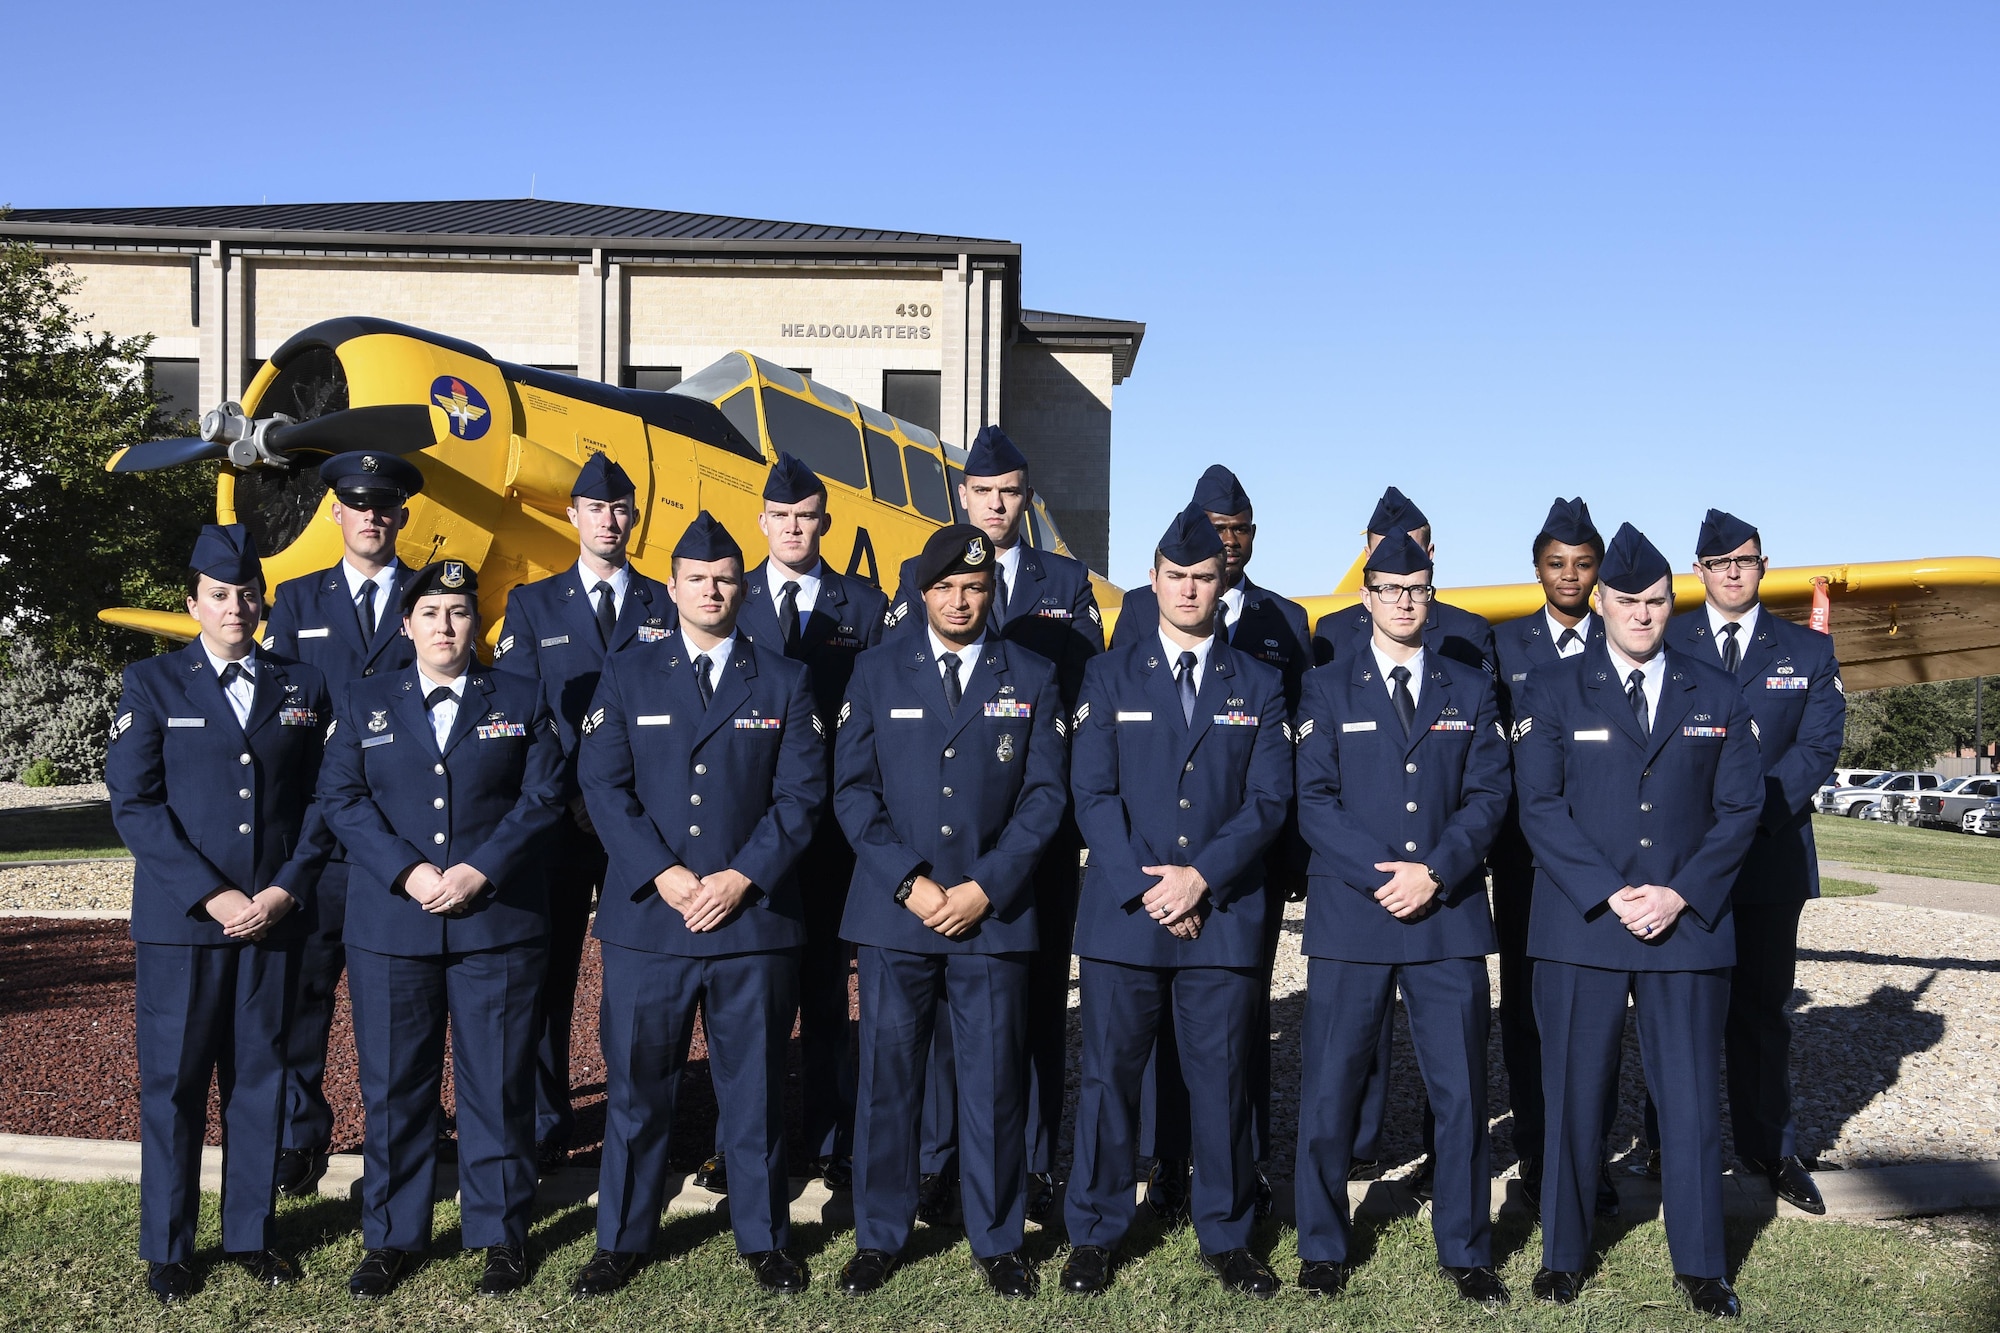 Airman Leadership School Class 17-G stands before the T-6 Texan static plane display on Goodfellow Air Force Base, Texas, Oct. 16, 2017. ALS is a six-week course designed to prepare senior airmen to assume supervisory duties by offering instruction in leadership, followership, written and oral communication skills, and the profession of arms.  (U.S. Air Force photo by Airman 1st Class Zachary Chapman/Released)